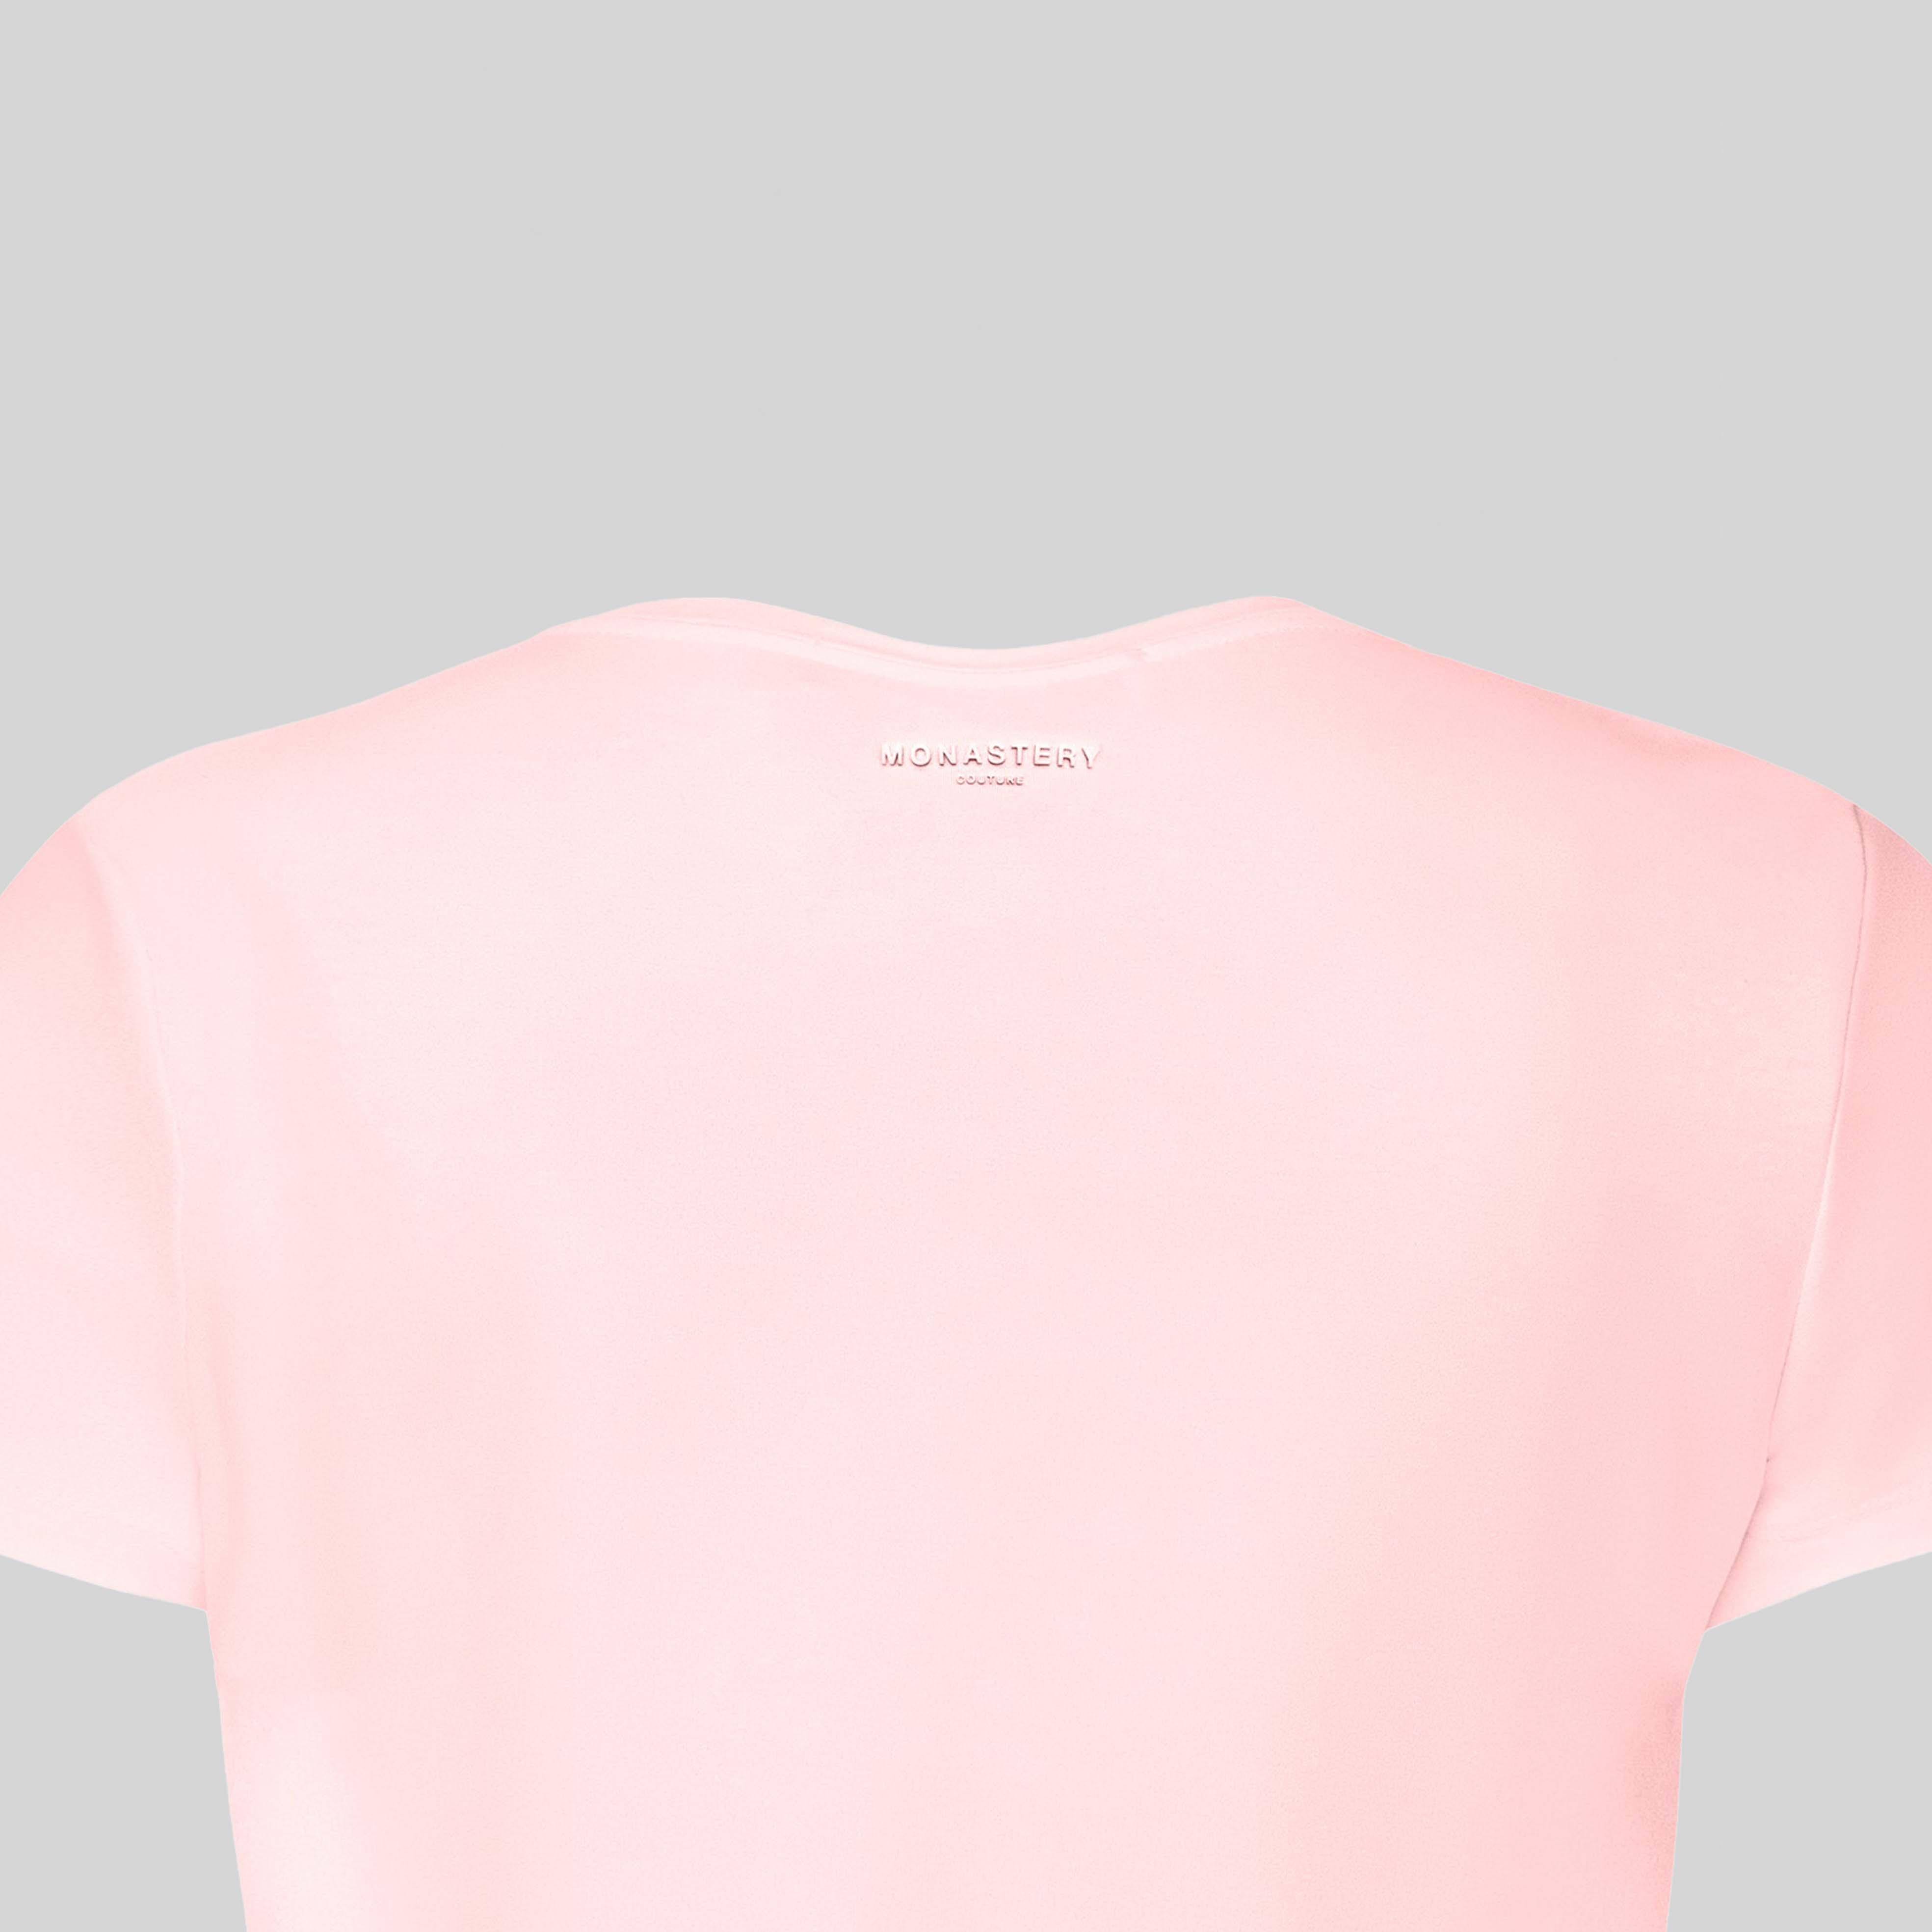 SANT ANGELO T-SHIRT PINK | Monastery Couture